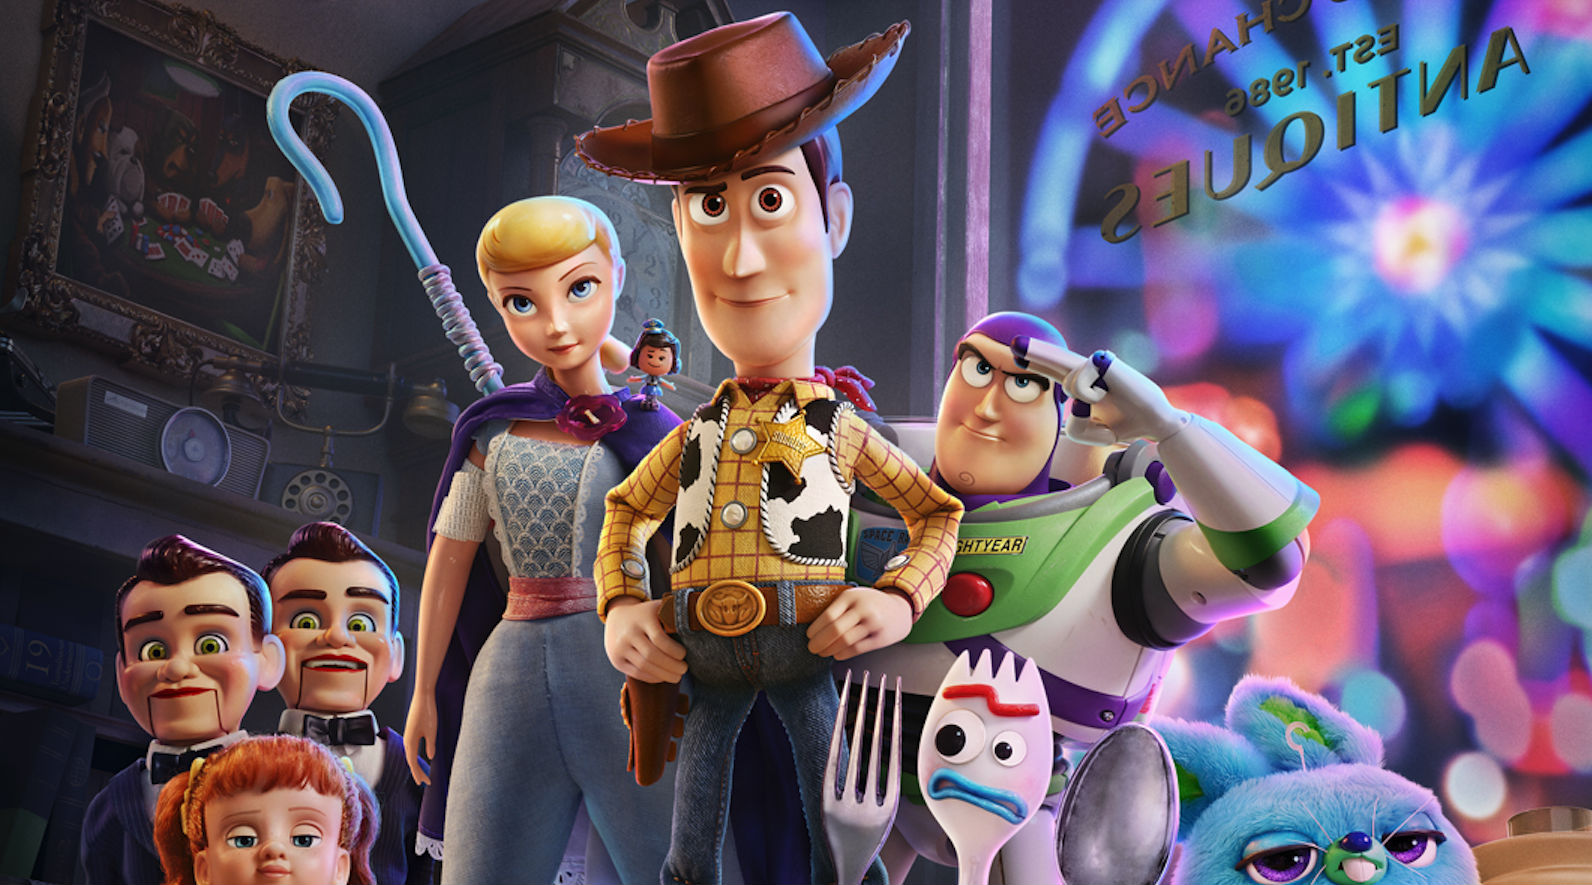 Toy Story 4: Director Josh Cooley On Why They Made A 4th Film